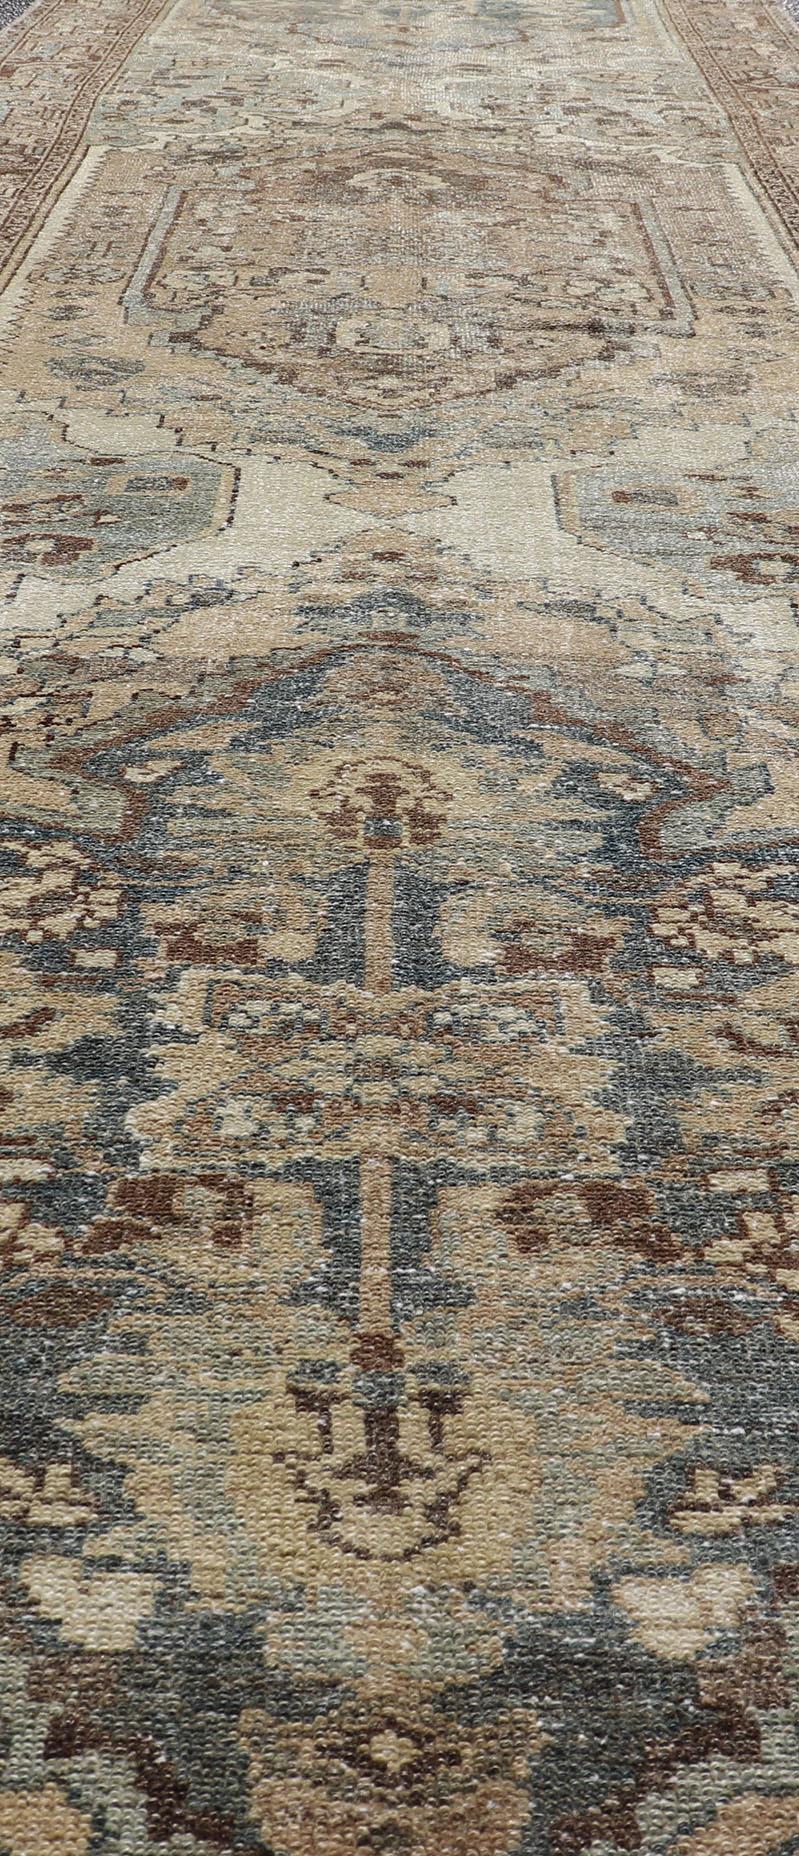 Antique Persian Malayer Runner With Geometric Medallion Design in Blue and Tan For Sale 6